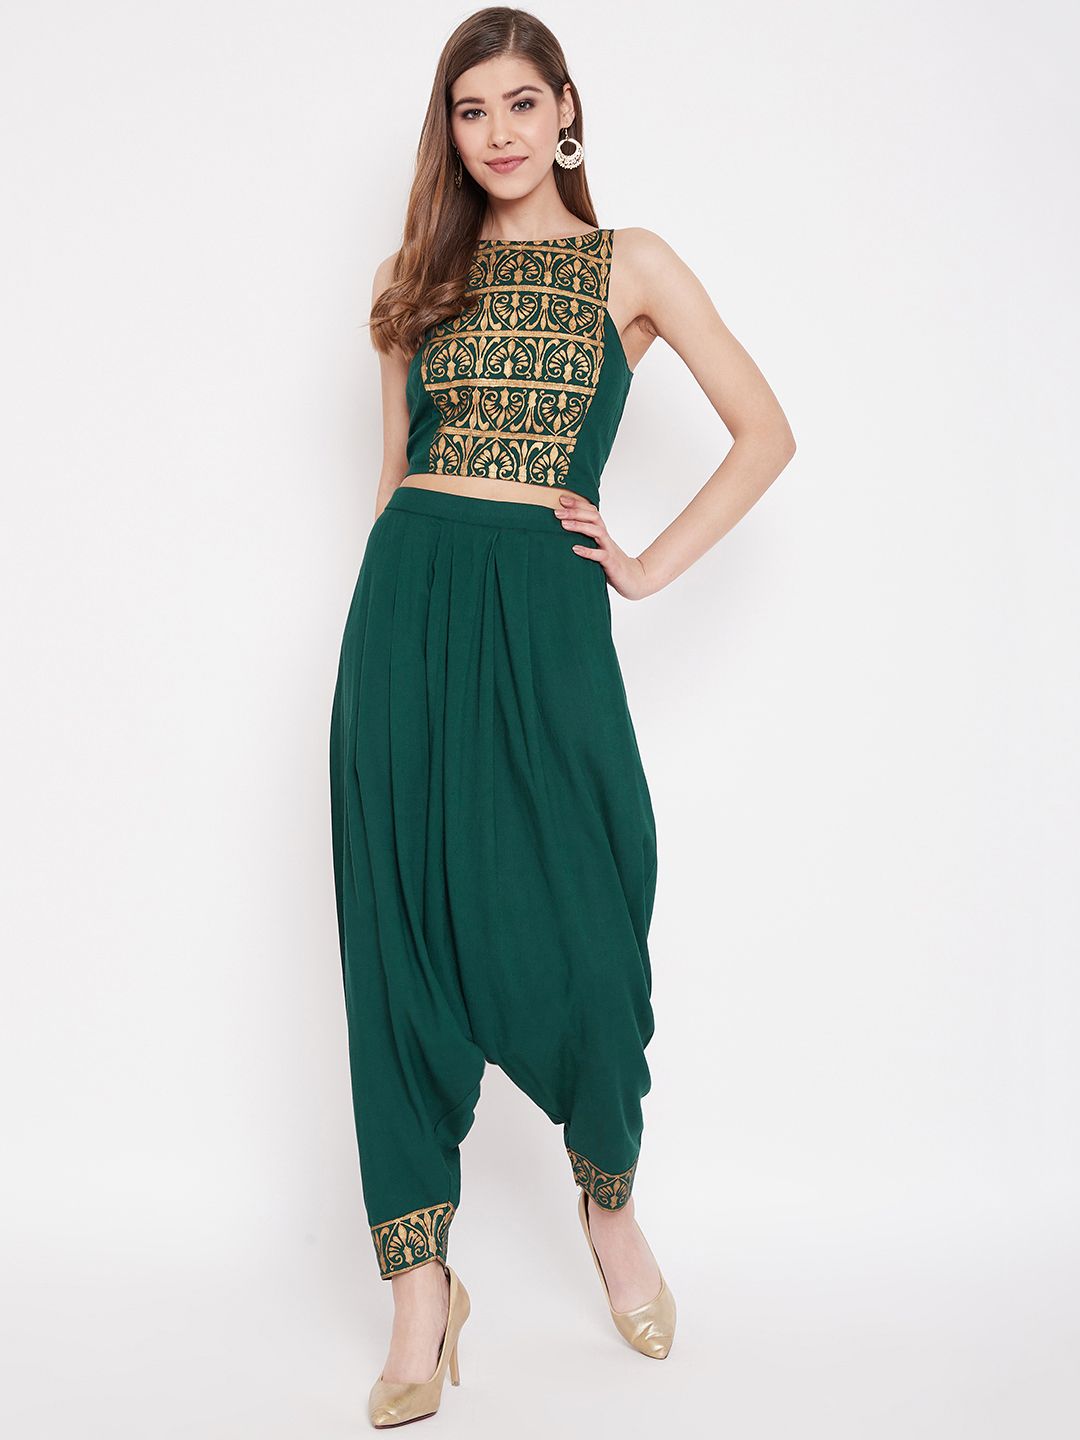 MABISH by Sonal Jain Women Green & Golden Printed Top with Dhoti Pants Price in India